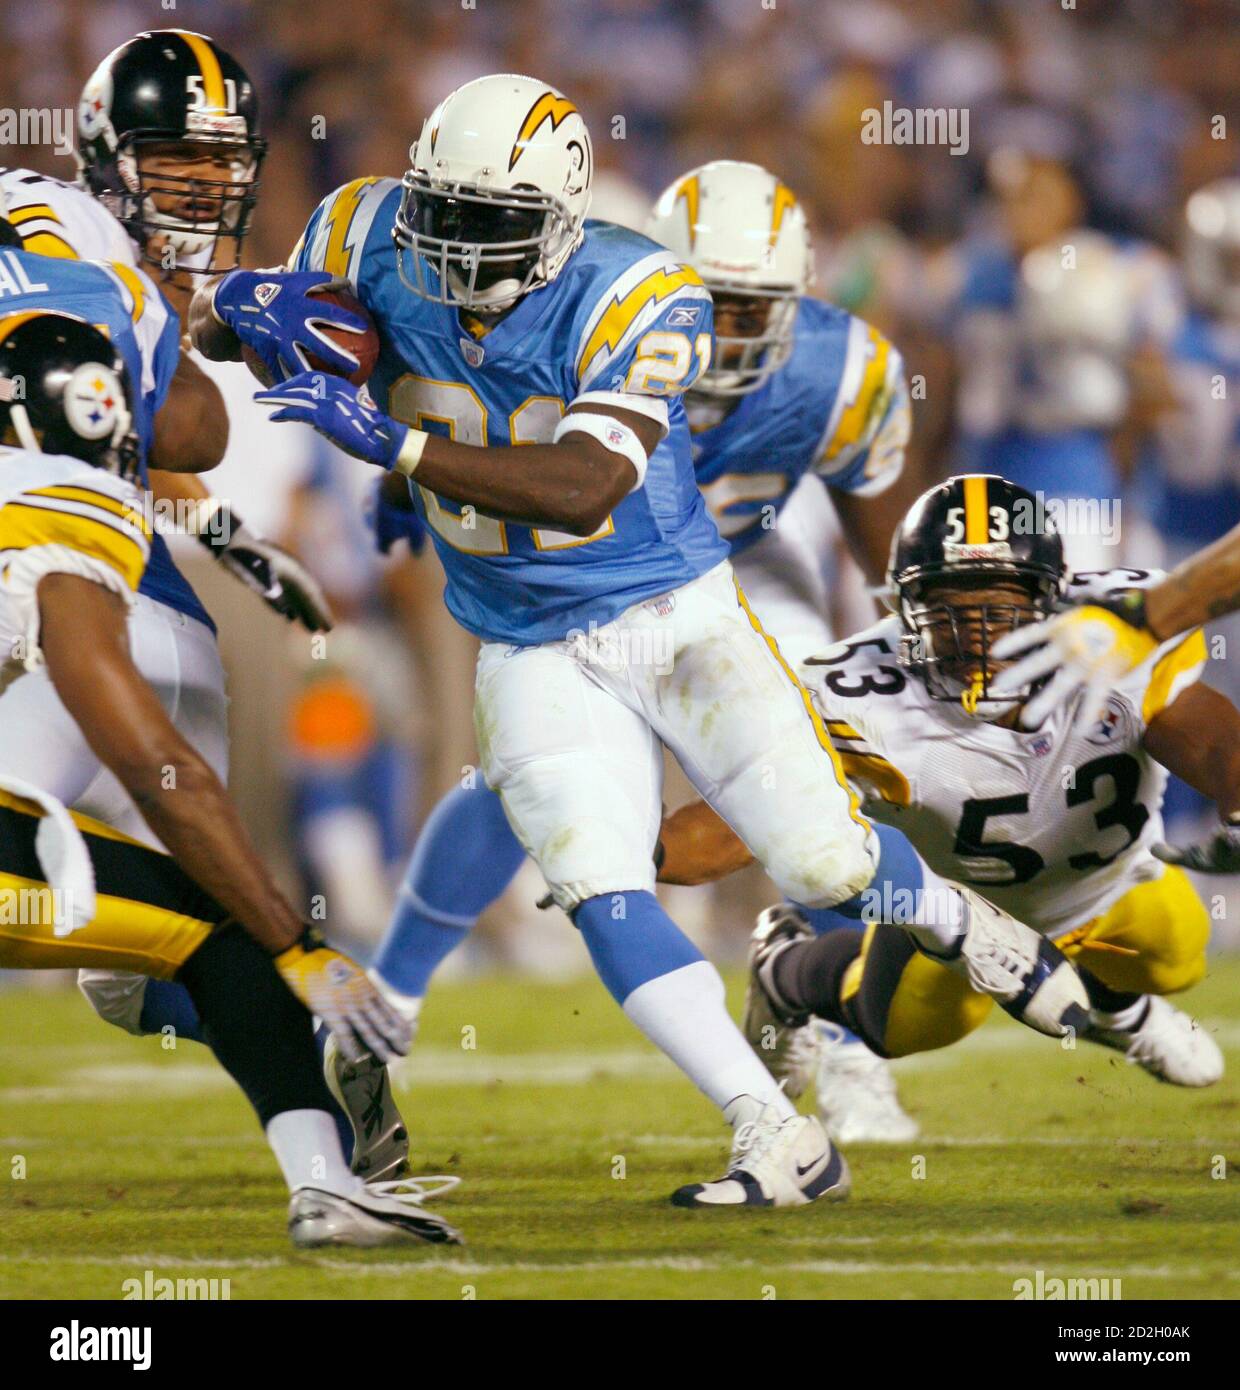 San Diego Chargers running back LaDainian Tomlinson (C) runs against the Pittsburgh Steelers during their National Football League game in San Diego, California, October 8, 2006.  REUTERS/Mike Blake(UNITED STATES) Stock Photo